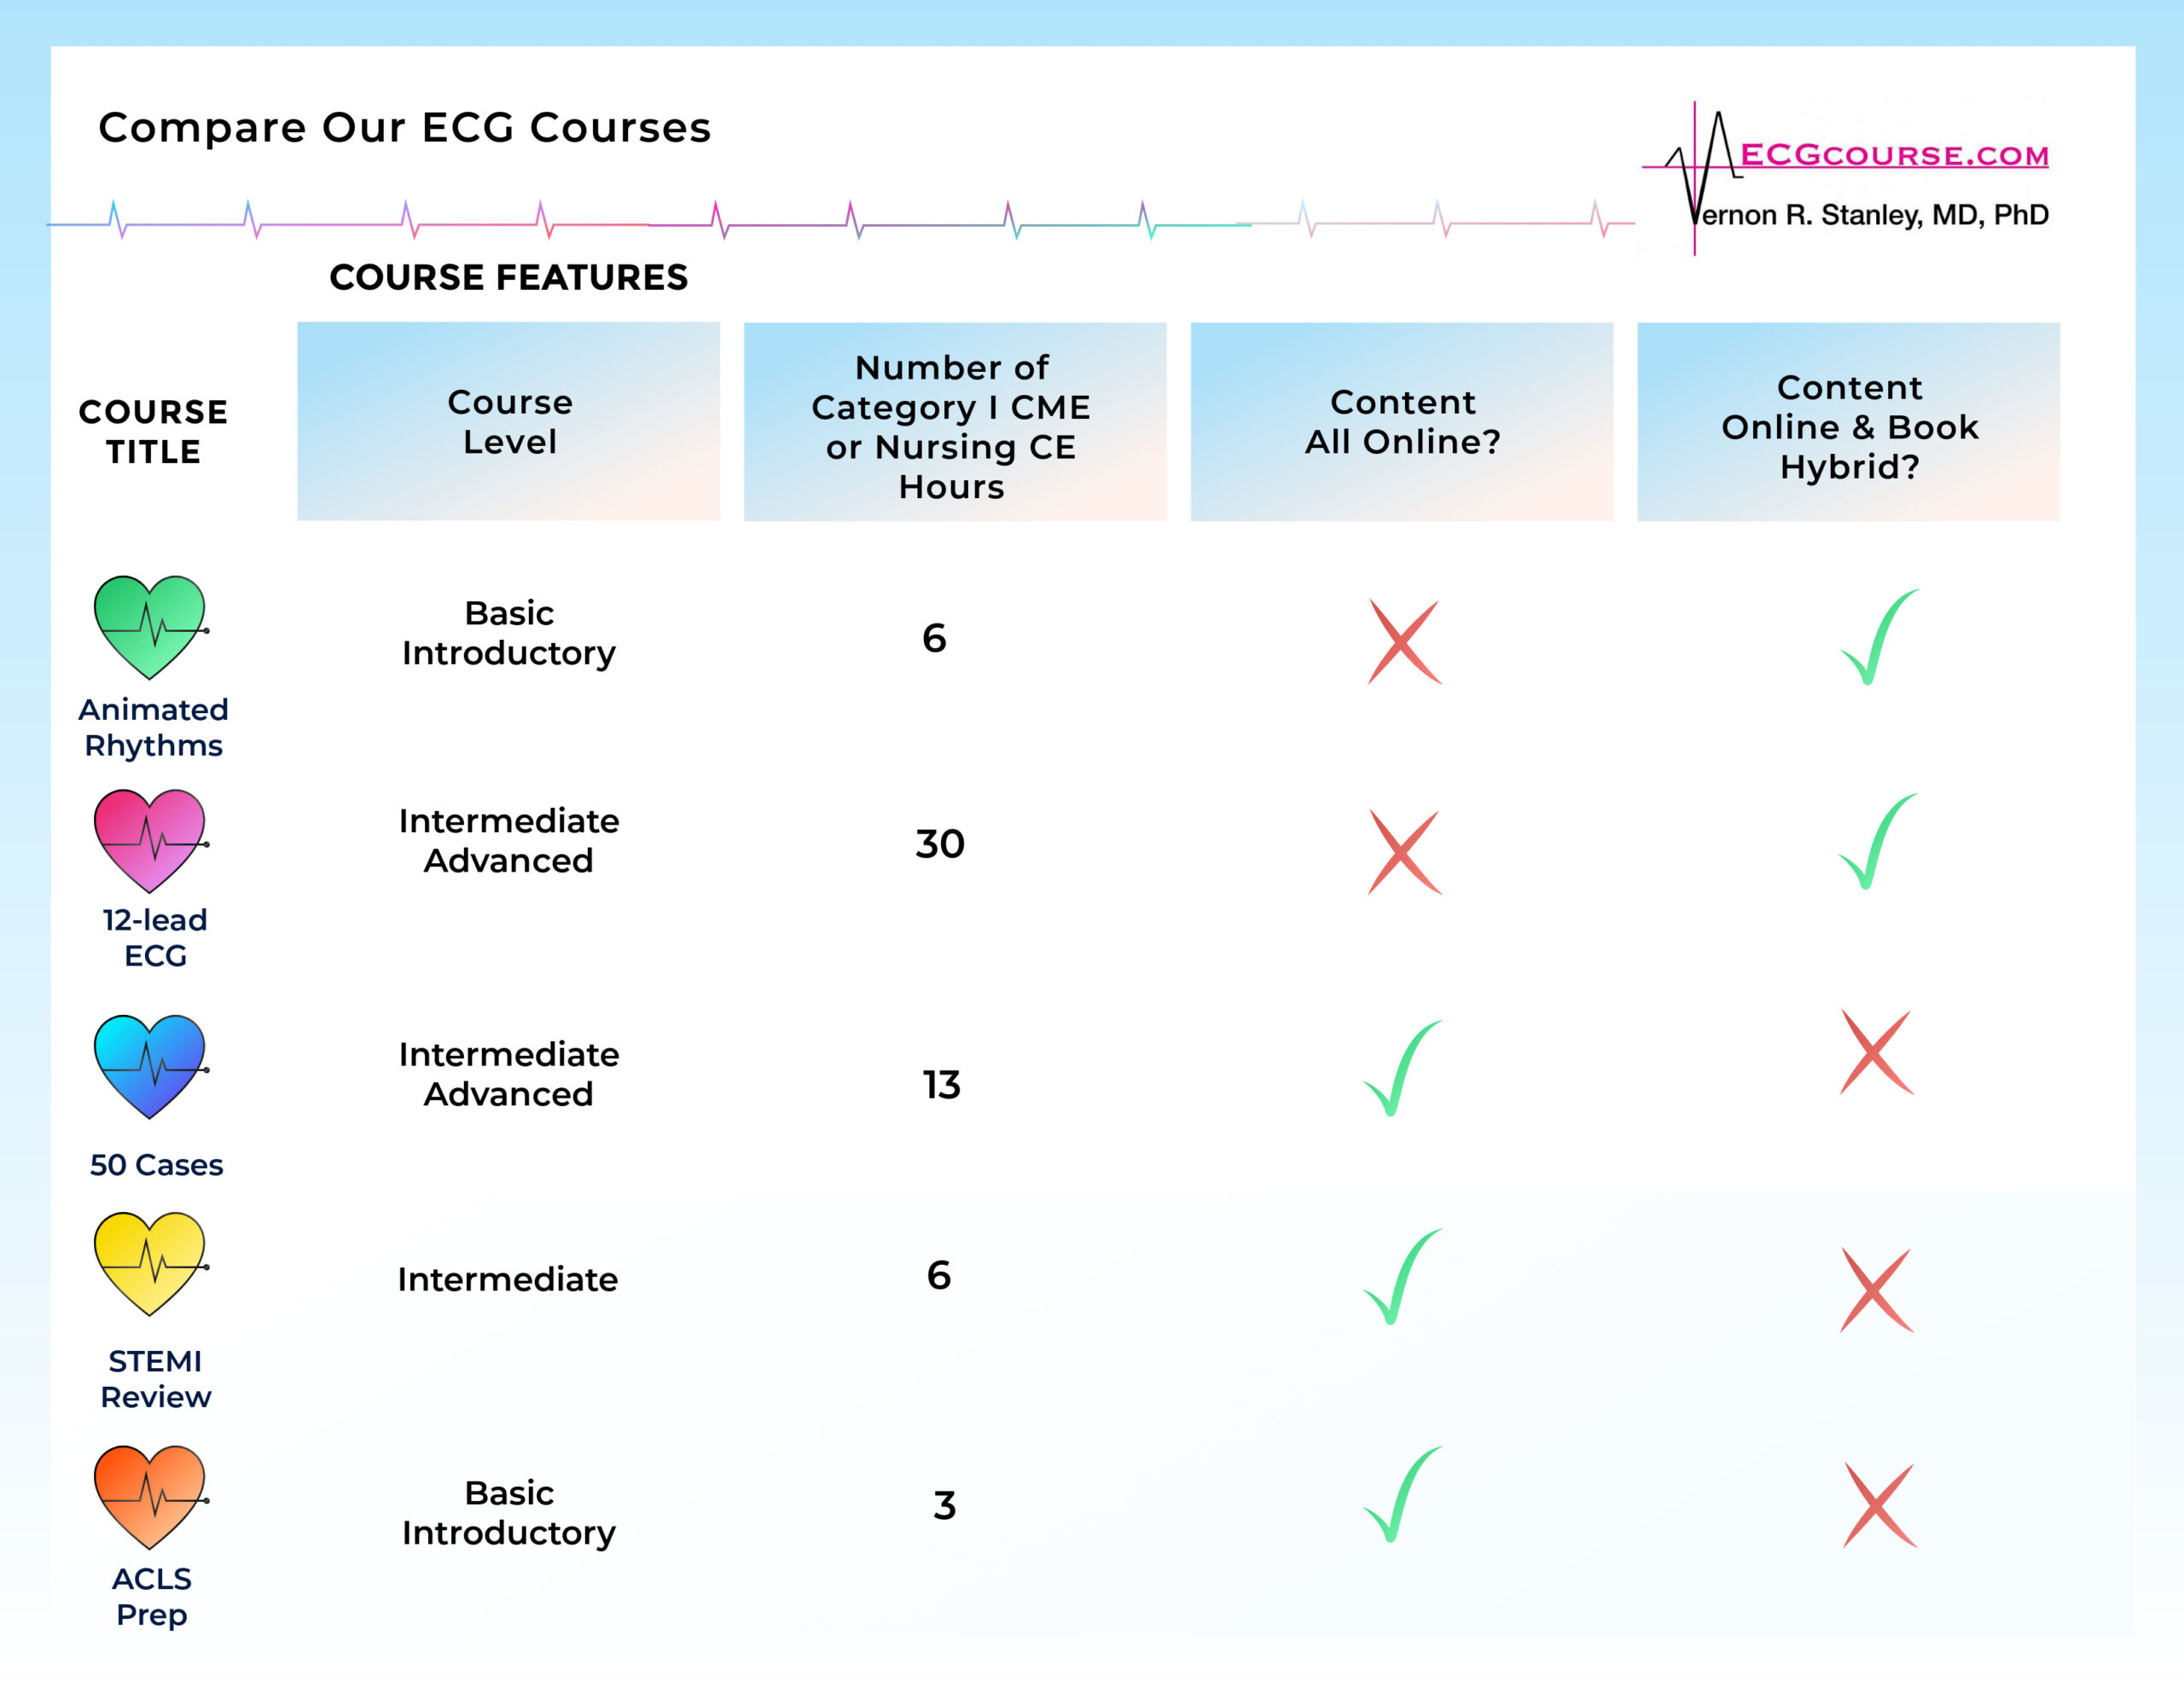 Infographic to Compare Dr Stanley's ECG and Rhythm Courses